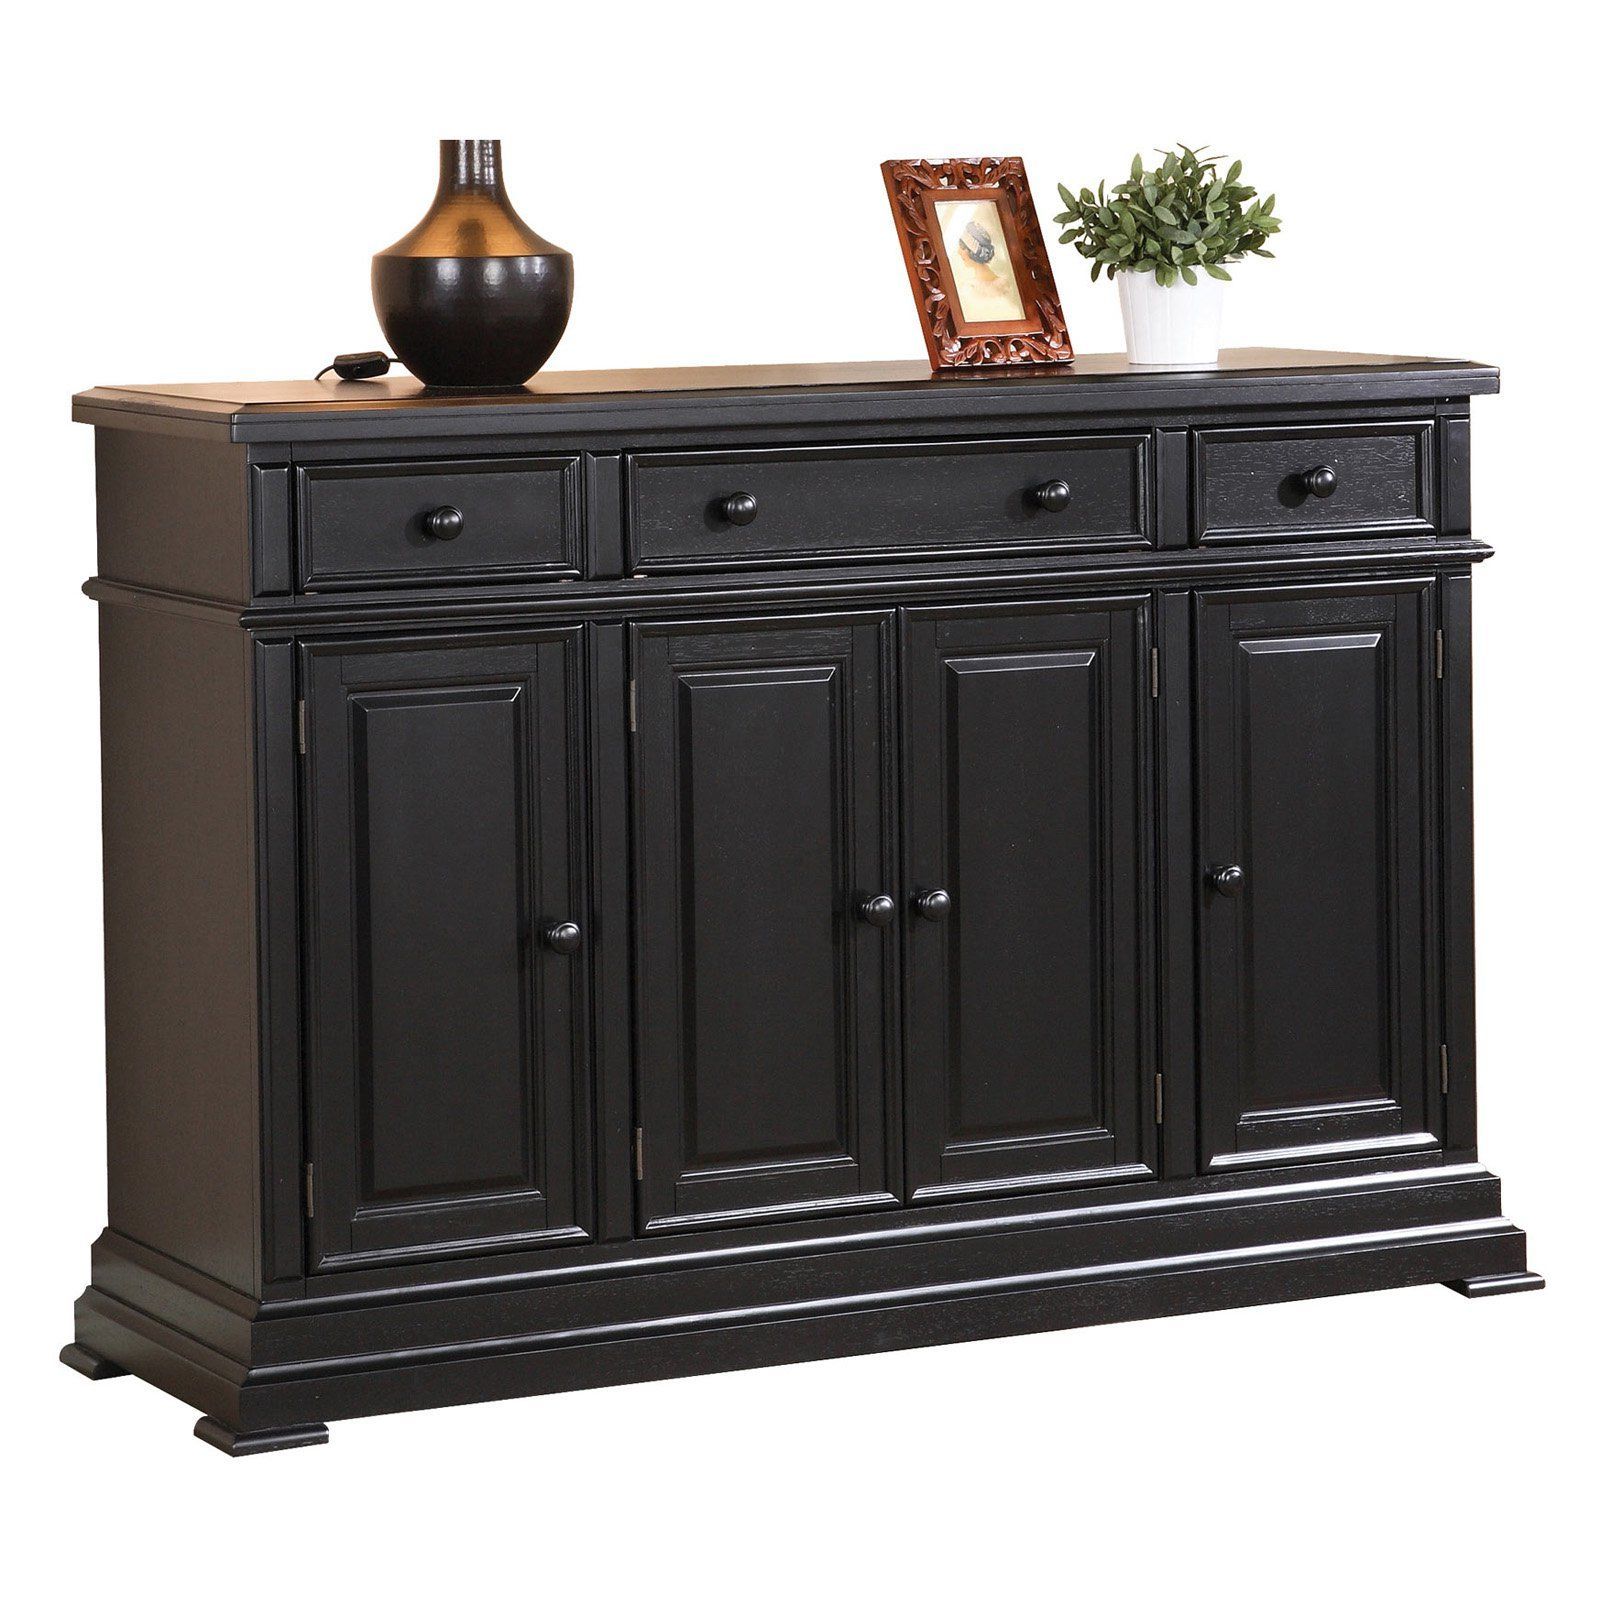 Winners Only 58 In. Wood Sideboard | Products In 2019 For Courtdale Sideboards (Gallery 6 of 20)